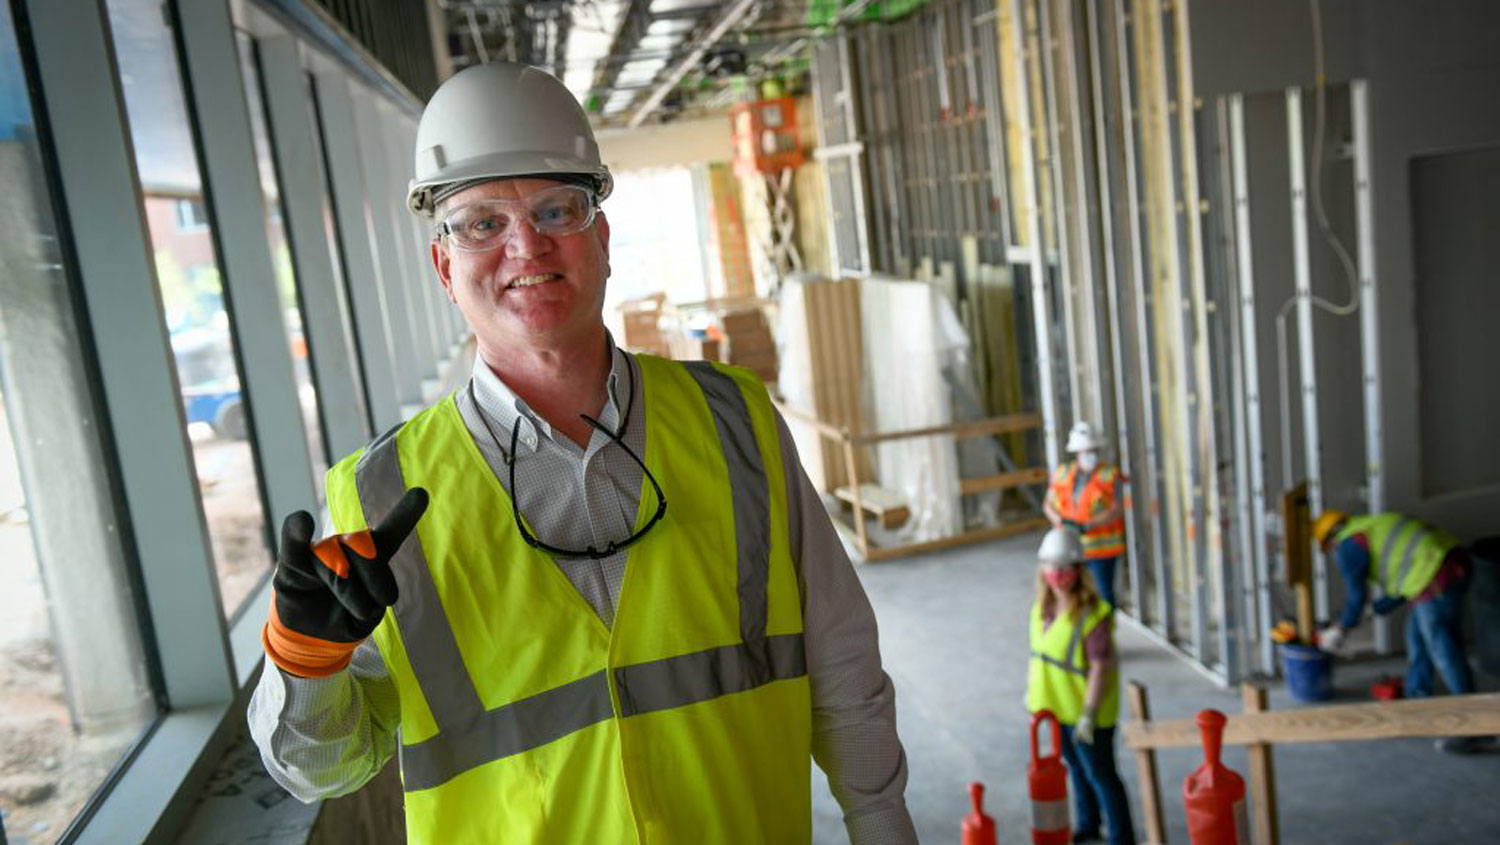 Jim Whitehurst wearing a hard hat at a construction site.